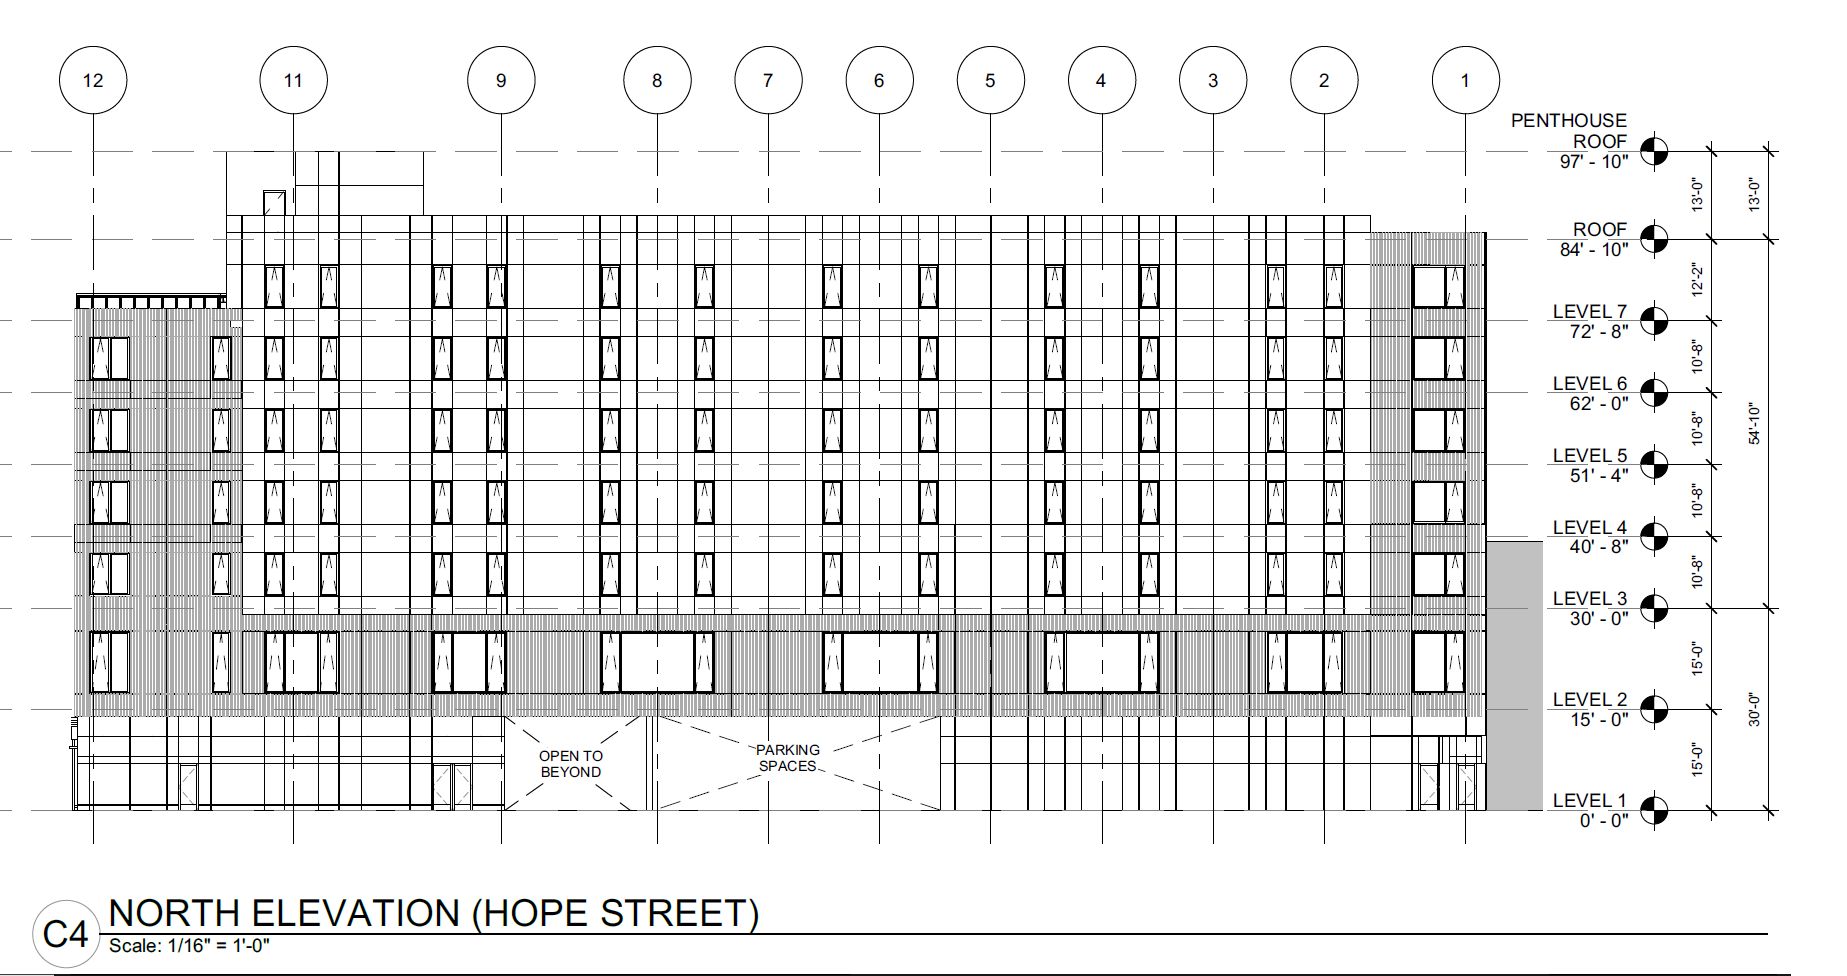 1118 North Front Street. Building elevation. Credit: BLT Architects via the City of Philadelphia